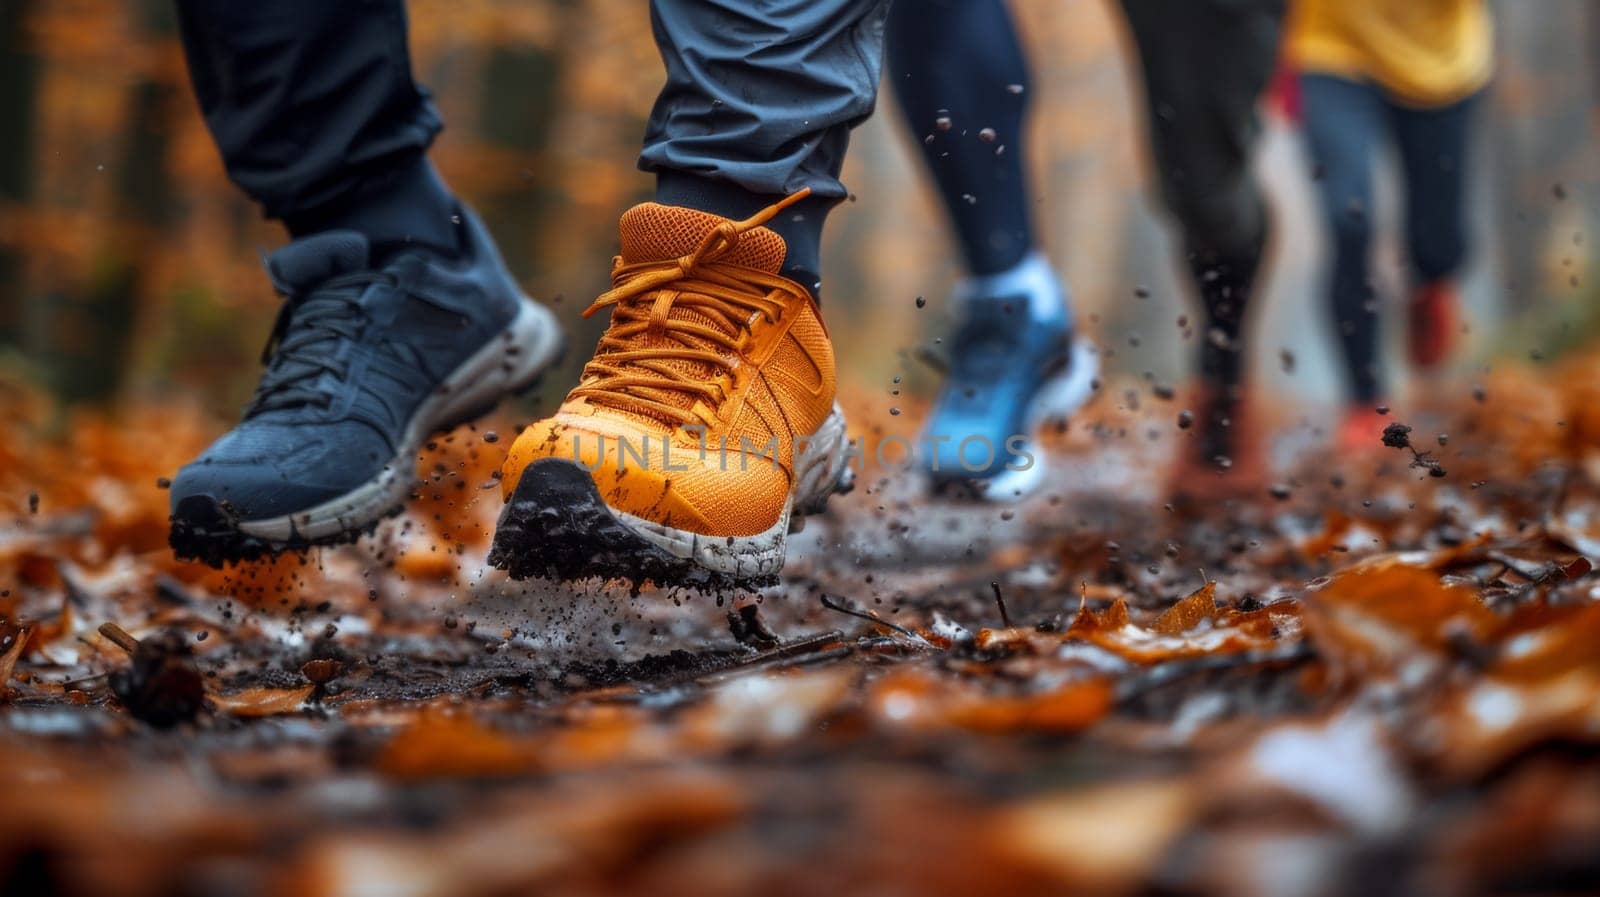 A group of people wearing shoes running through a forest